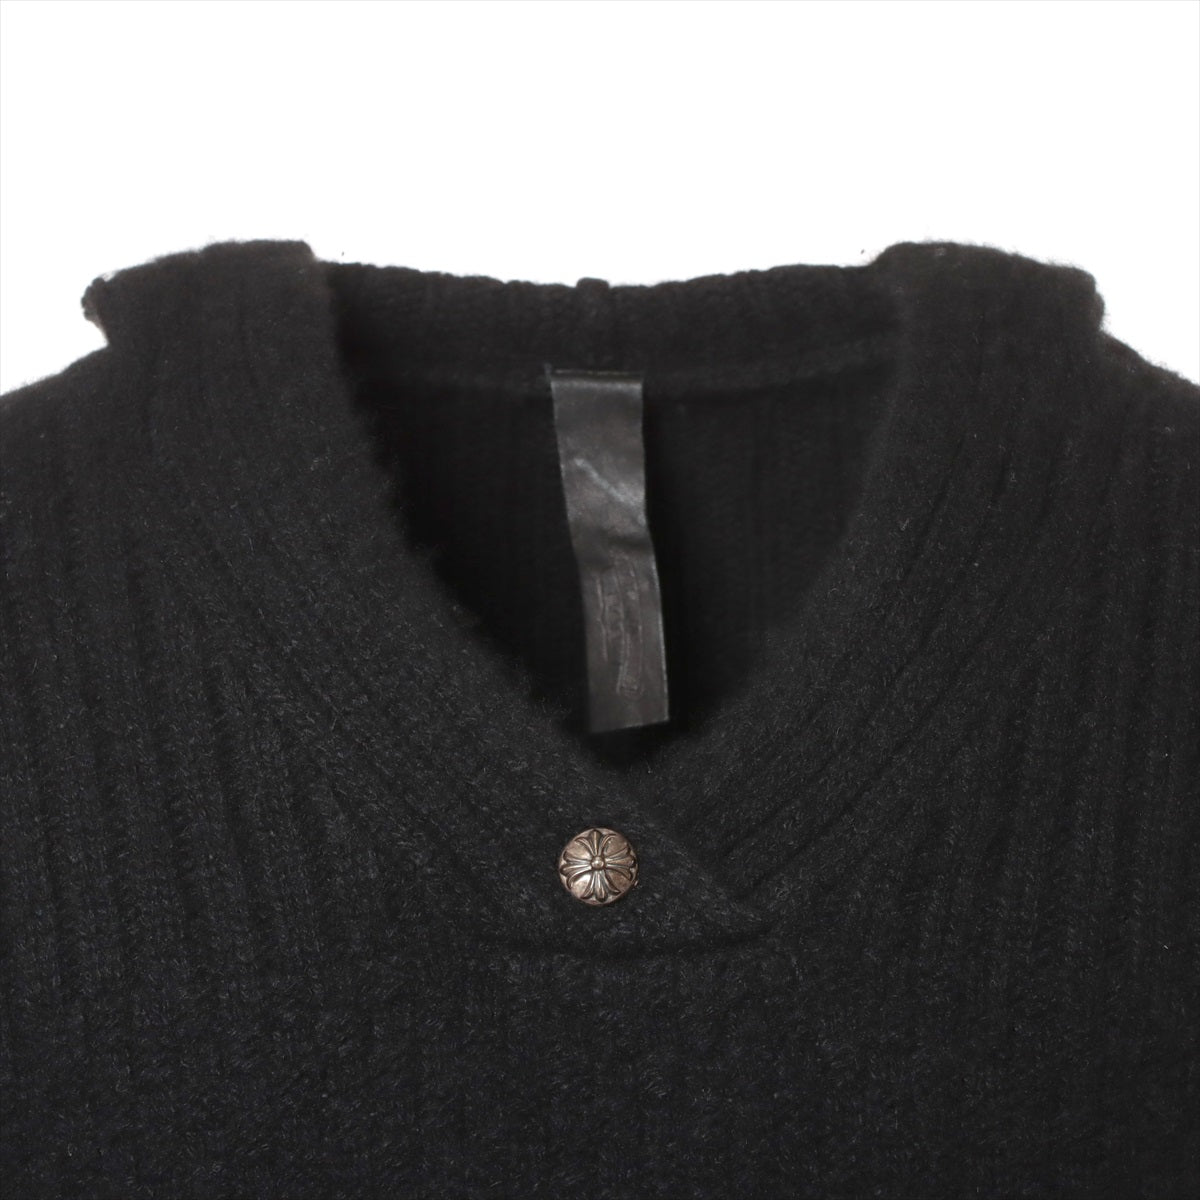 Chrome Hearts Parker Cashmere Black L Cross Patch Cross button knitted hoodie